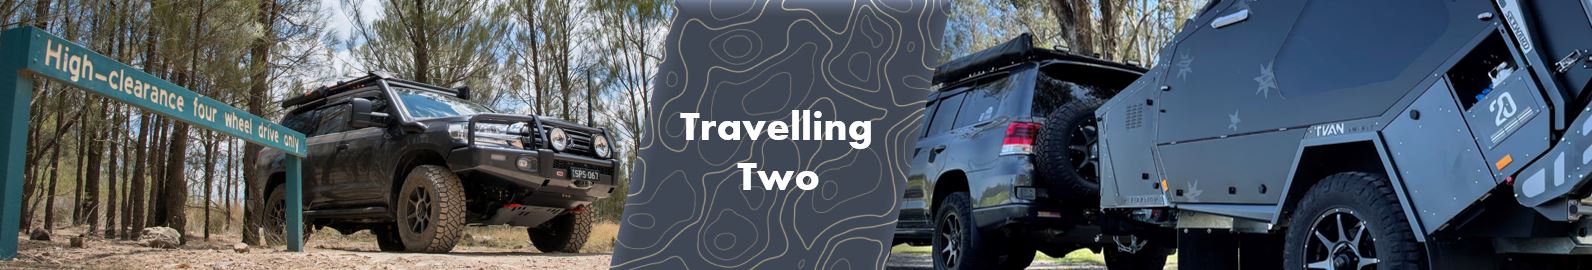 Travelling Two